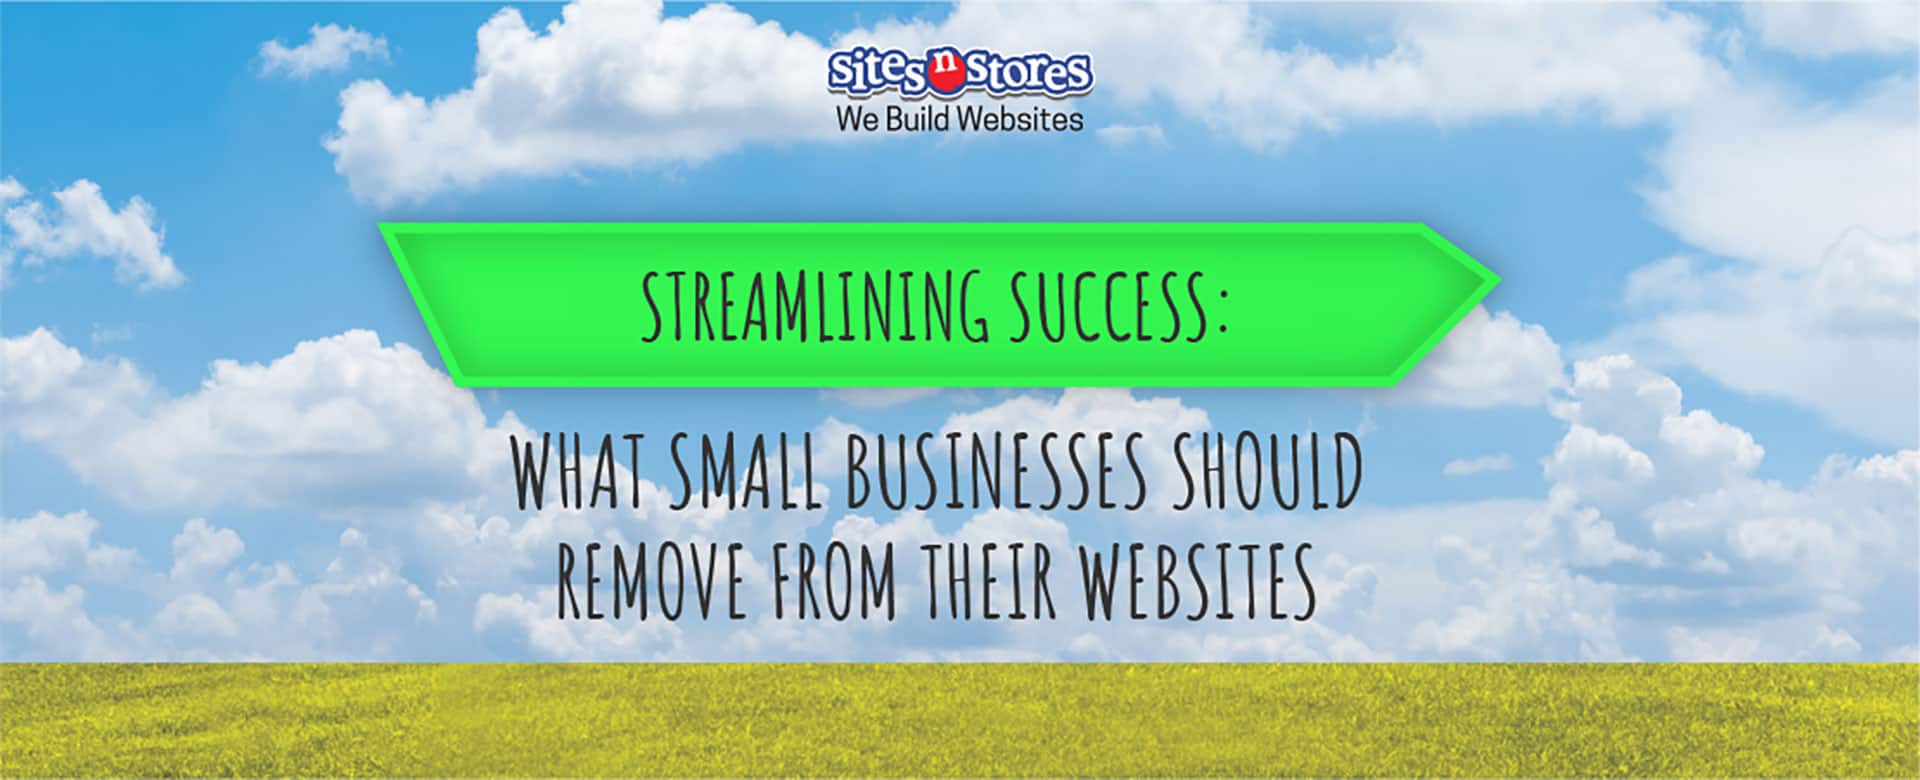 Streamlining Success: What Small Businesses Should Remove From Their Websites